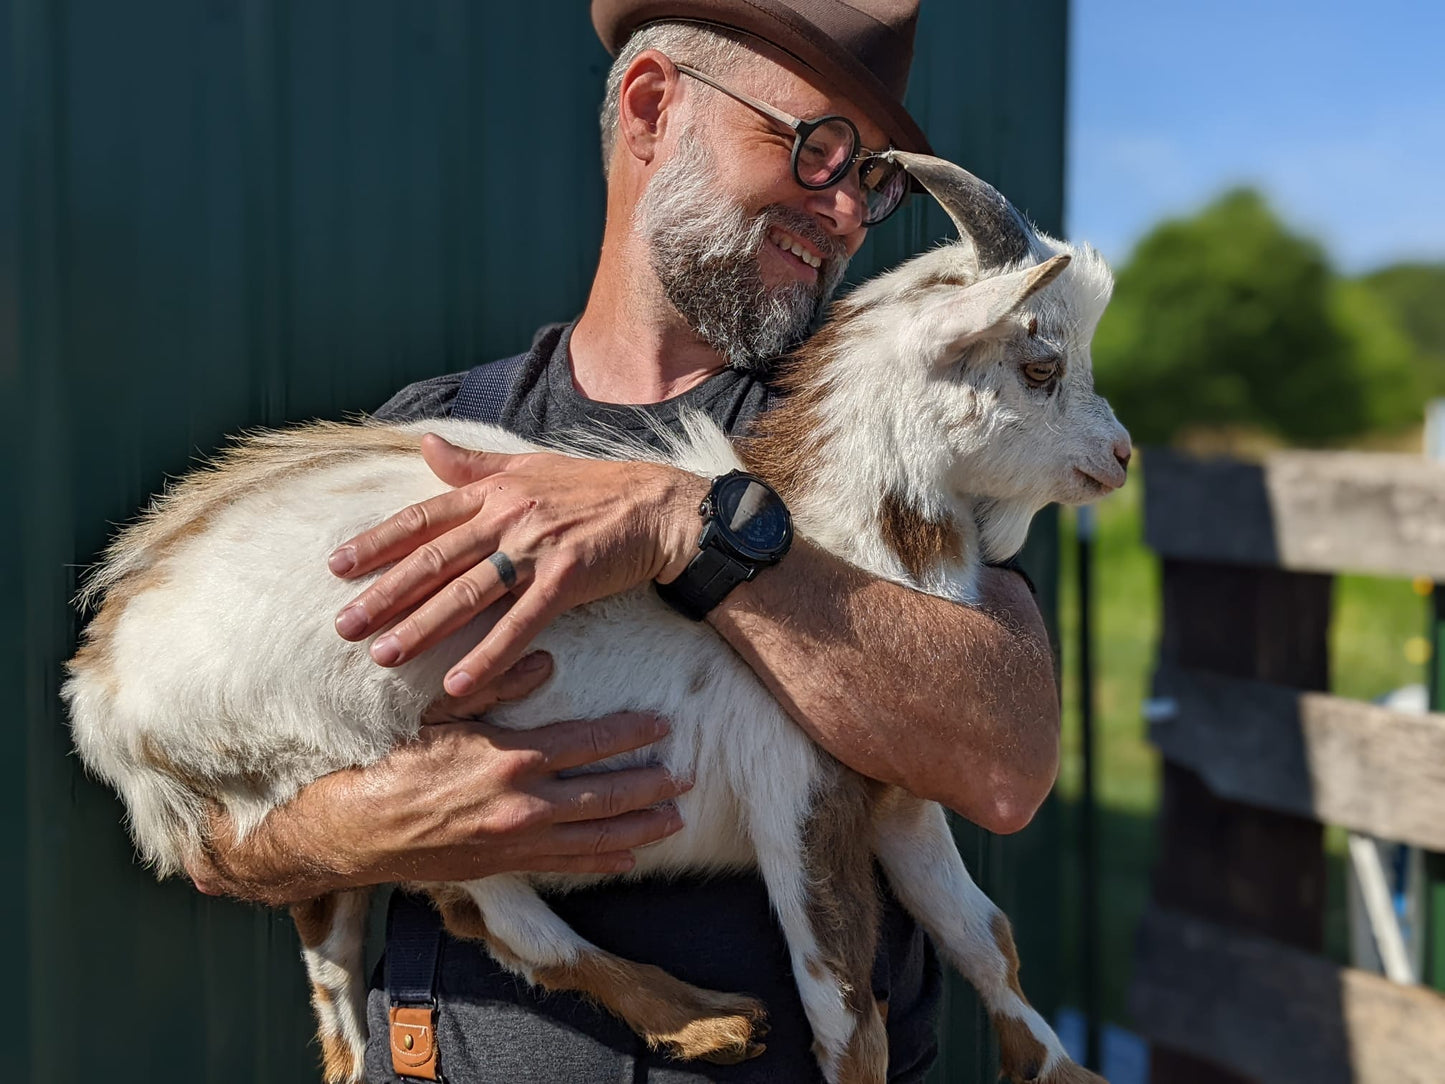 Smiling man in a hat holding a goat